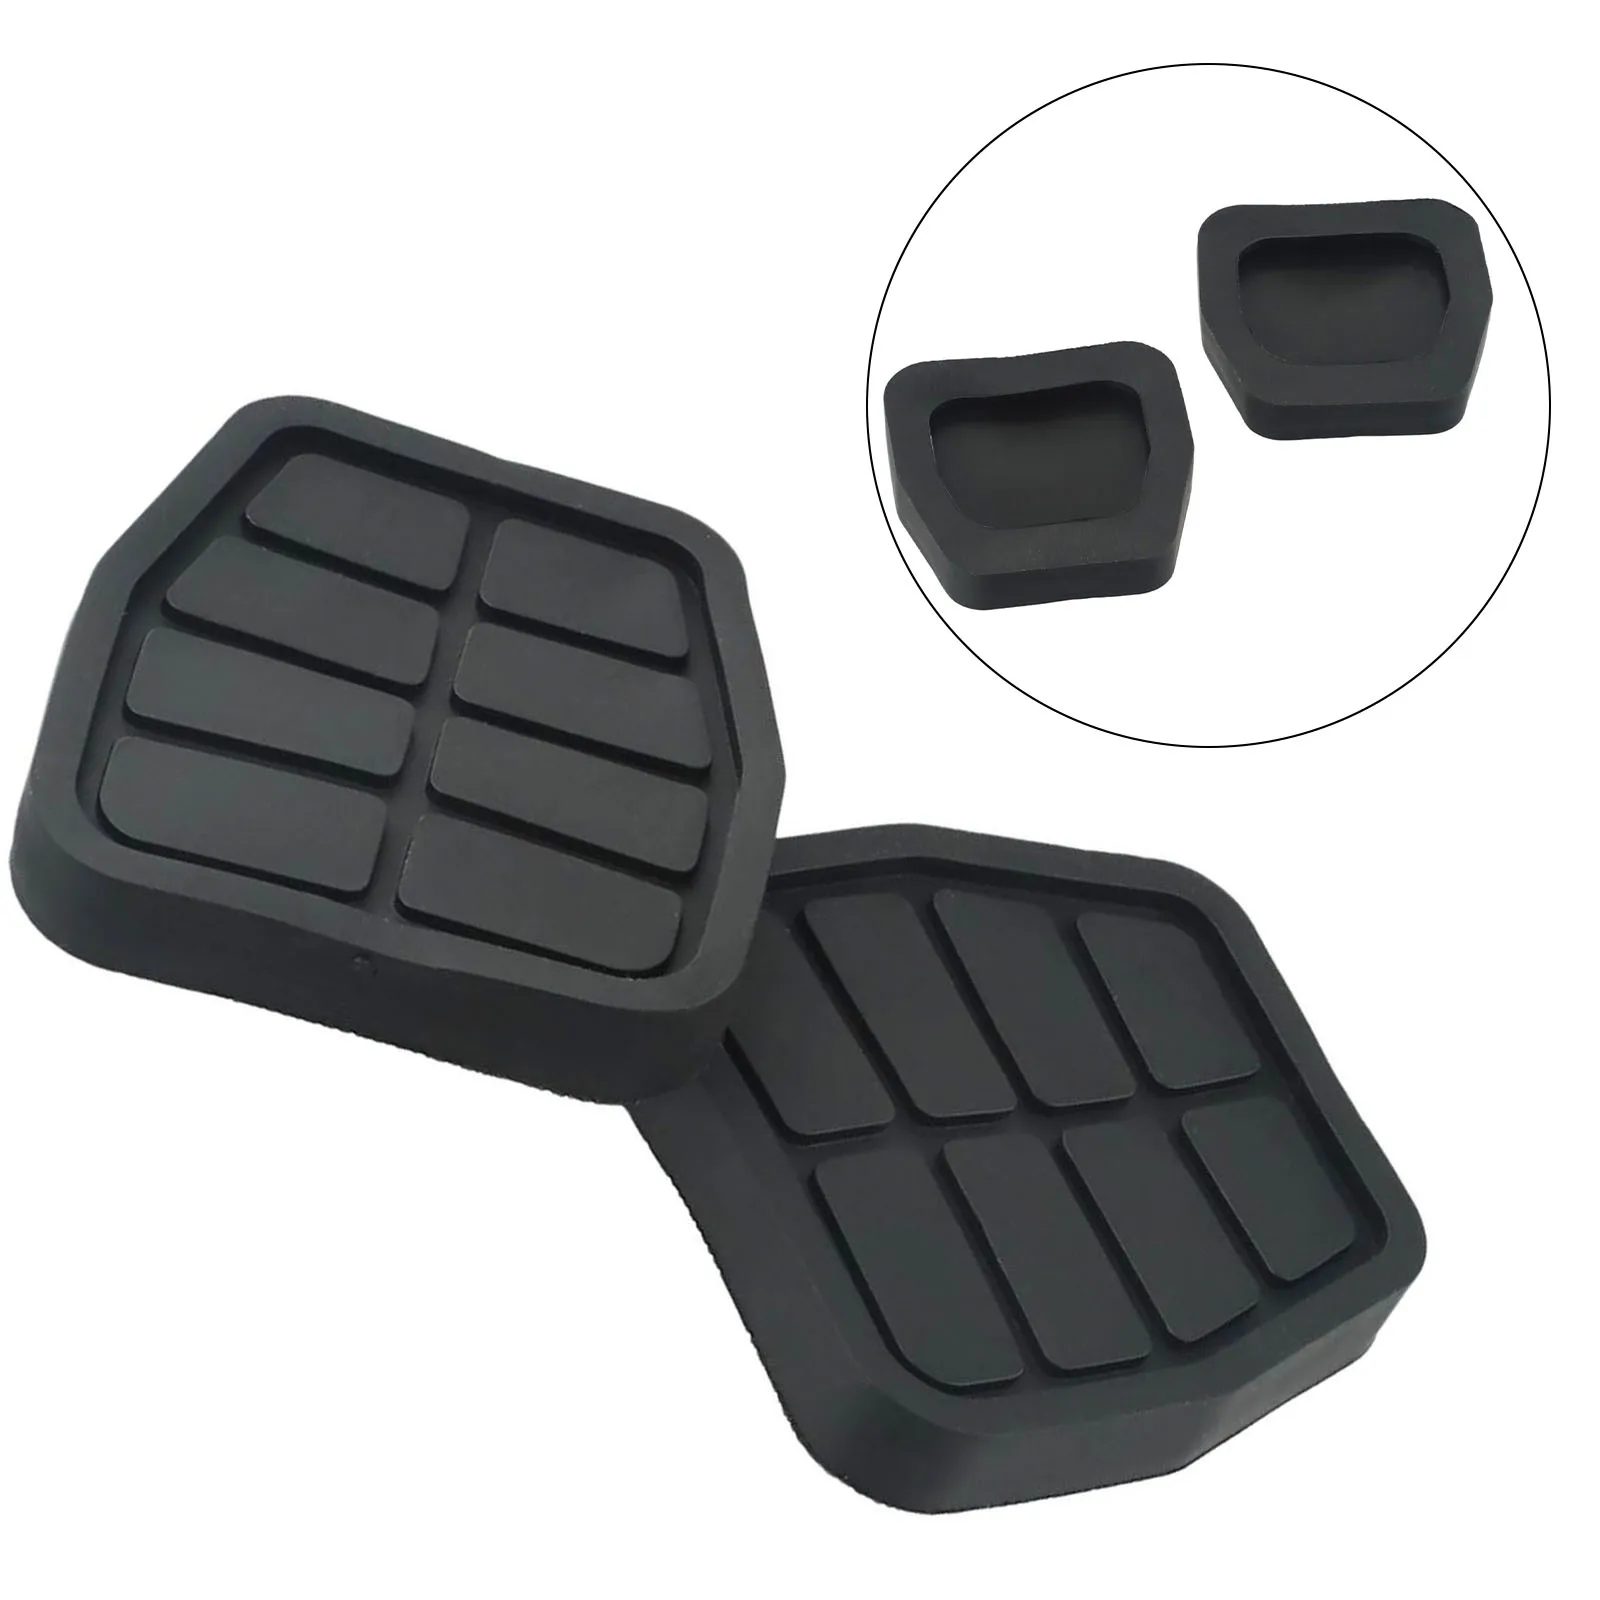 Durable New High Quality 2x Pedal Pad Covers 321 721 173 Black Rubber Secure Grip Long-lasting Easy Installation